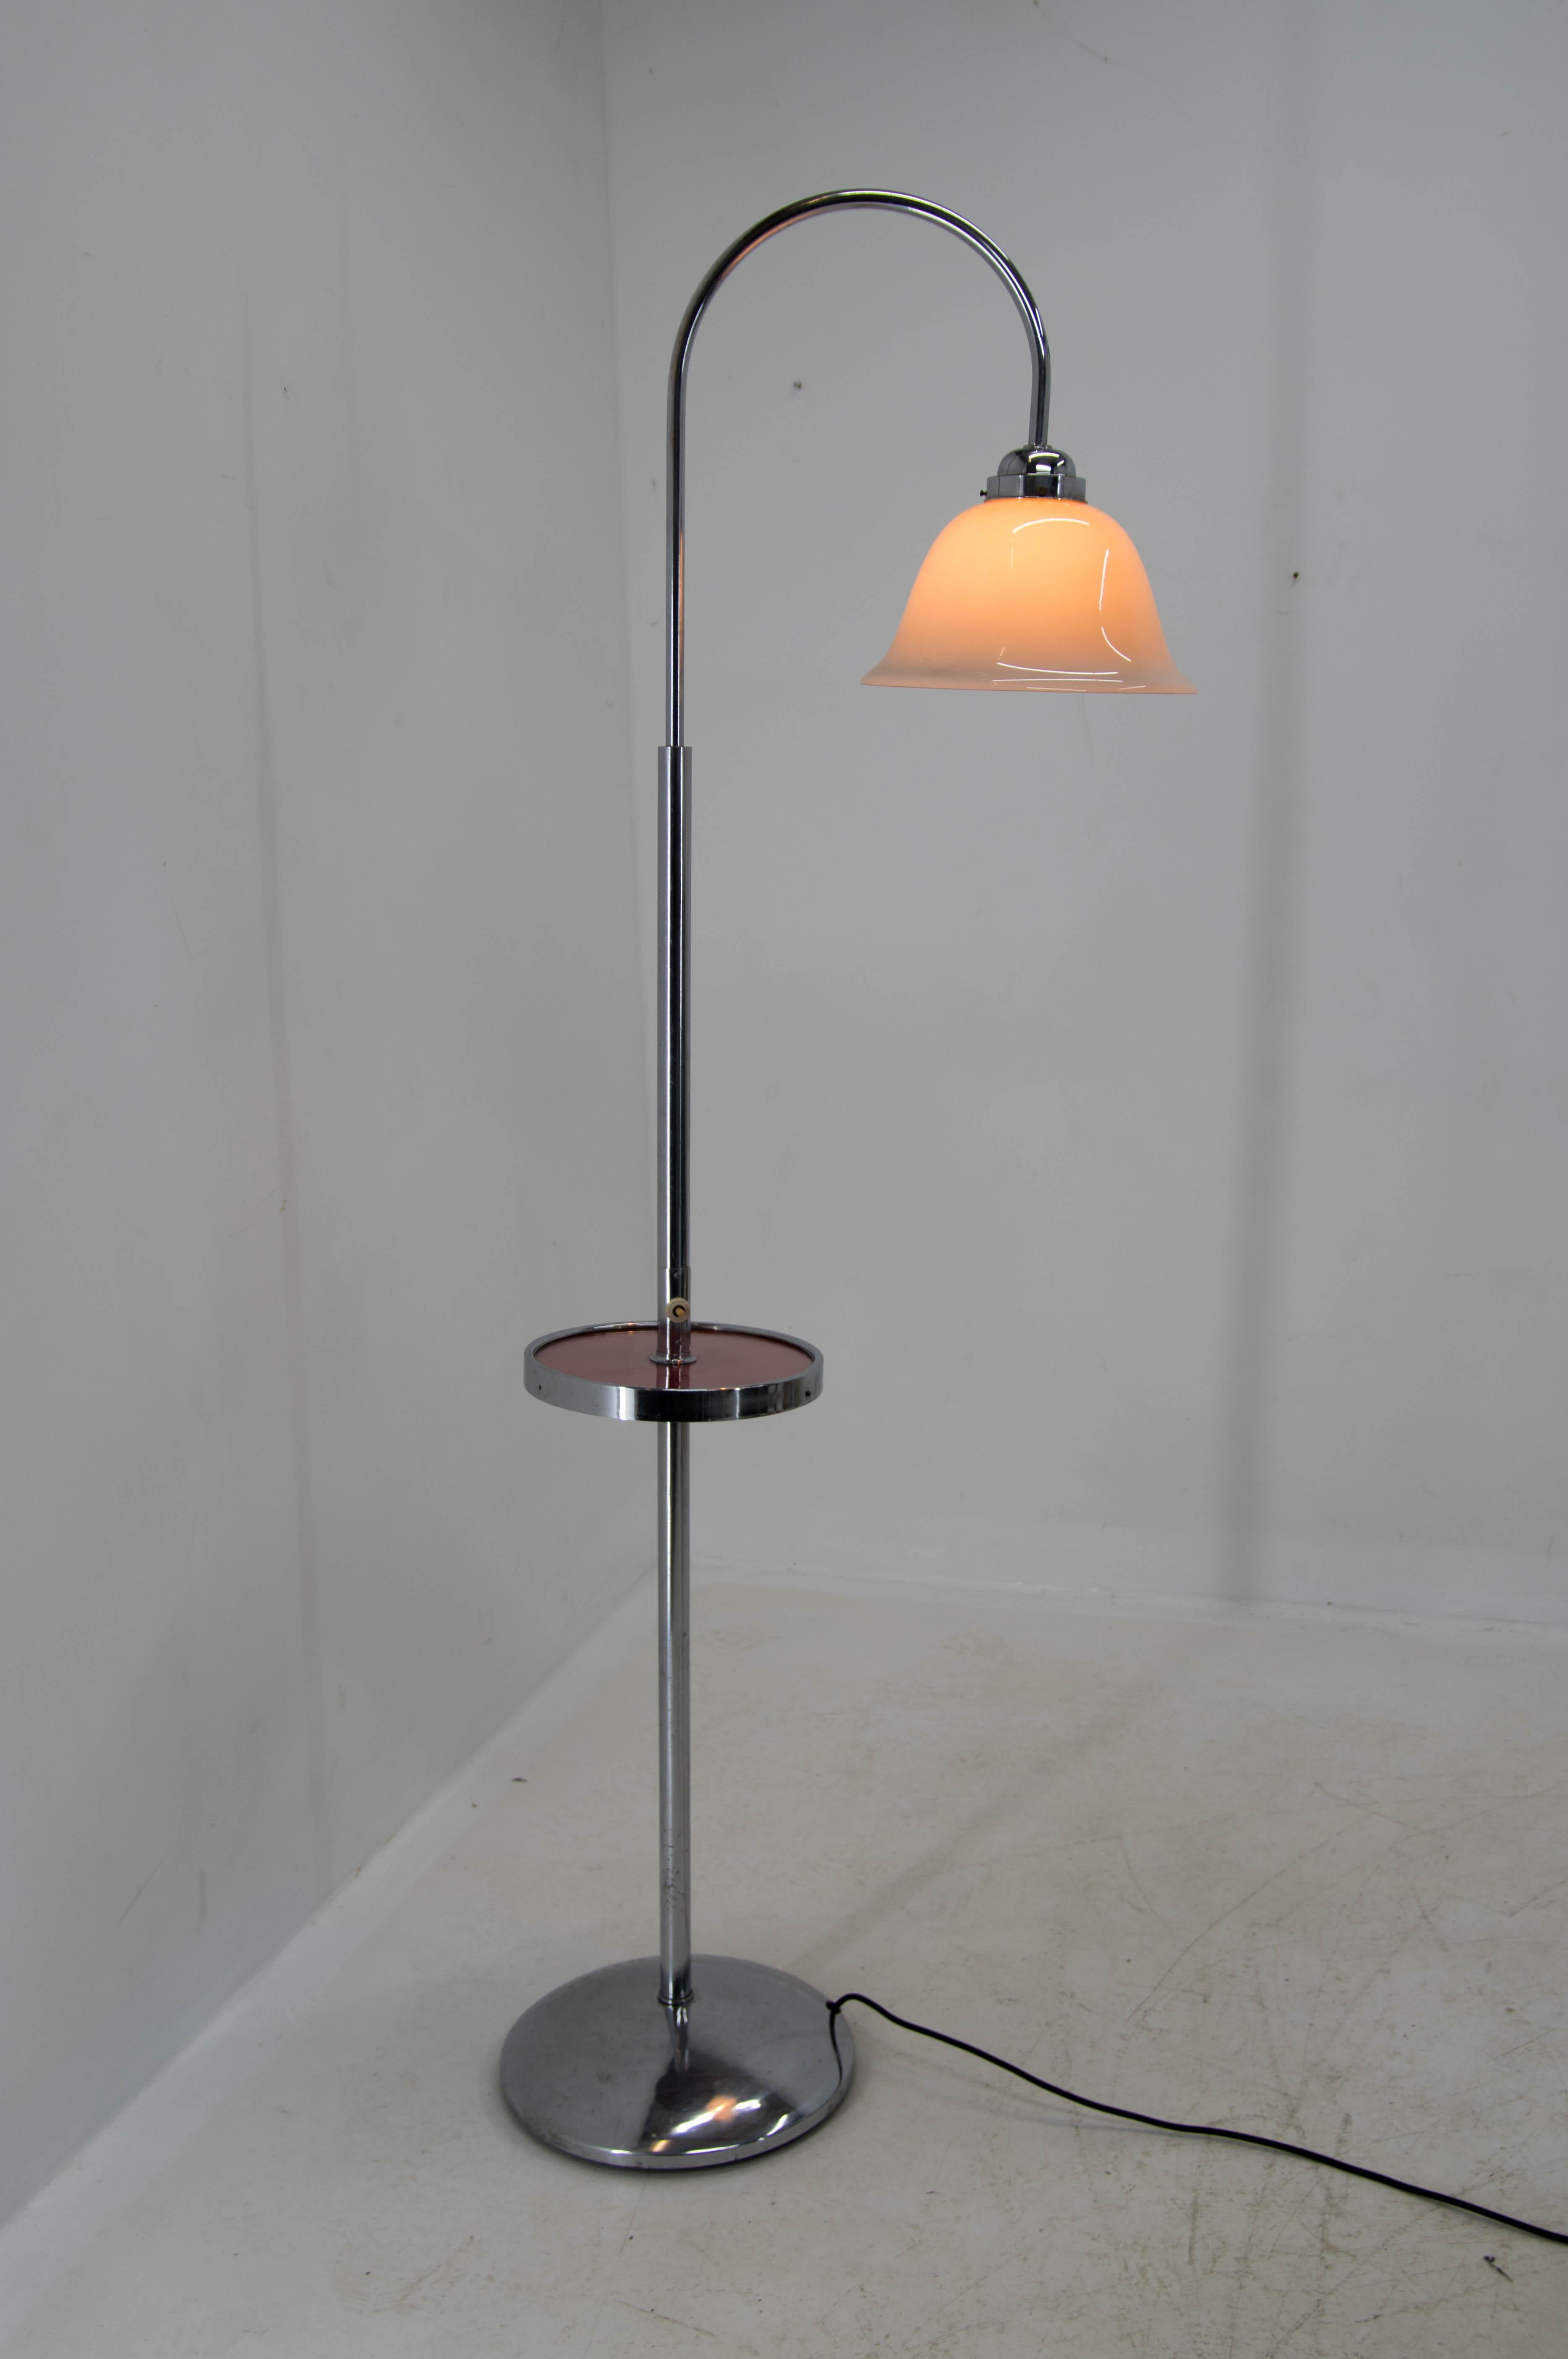 Chrome-plated Art Deco floor lamp.
Very good original condition.
Chrome with minor age patina.
Pink glass shade in perfect condition.
Rewired : 1x60W, E25-E27 bulb
US plug adapter included.